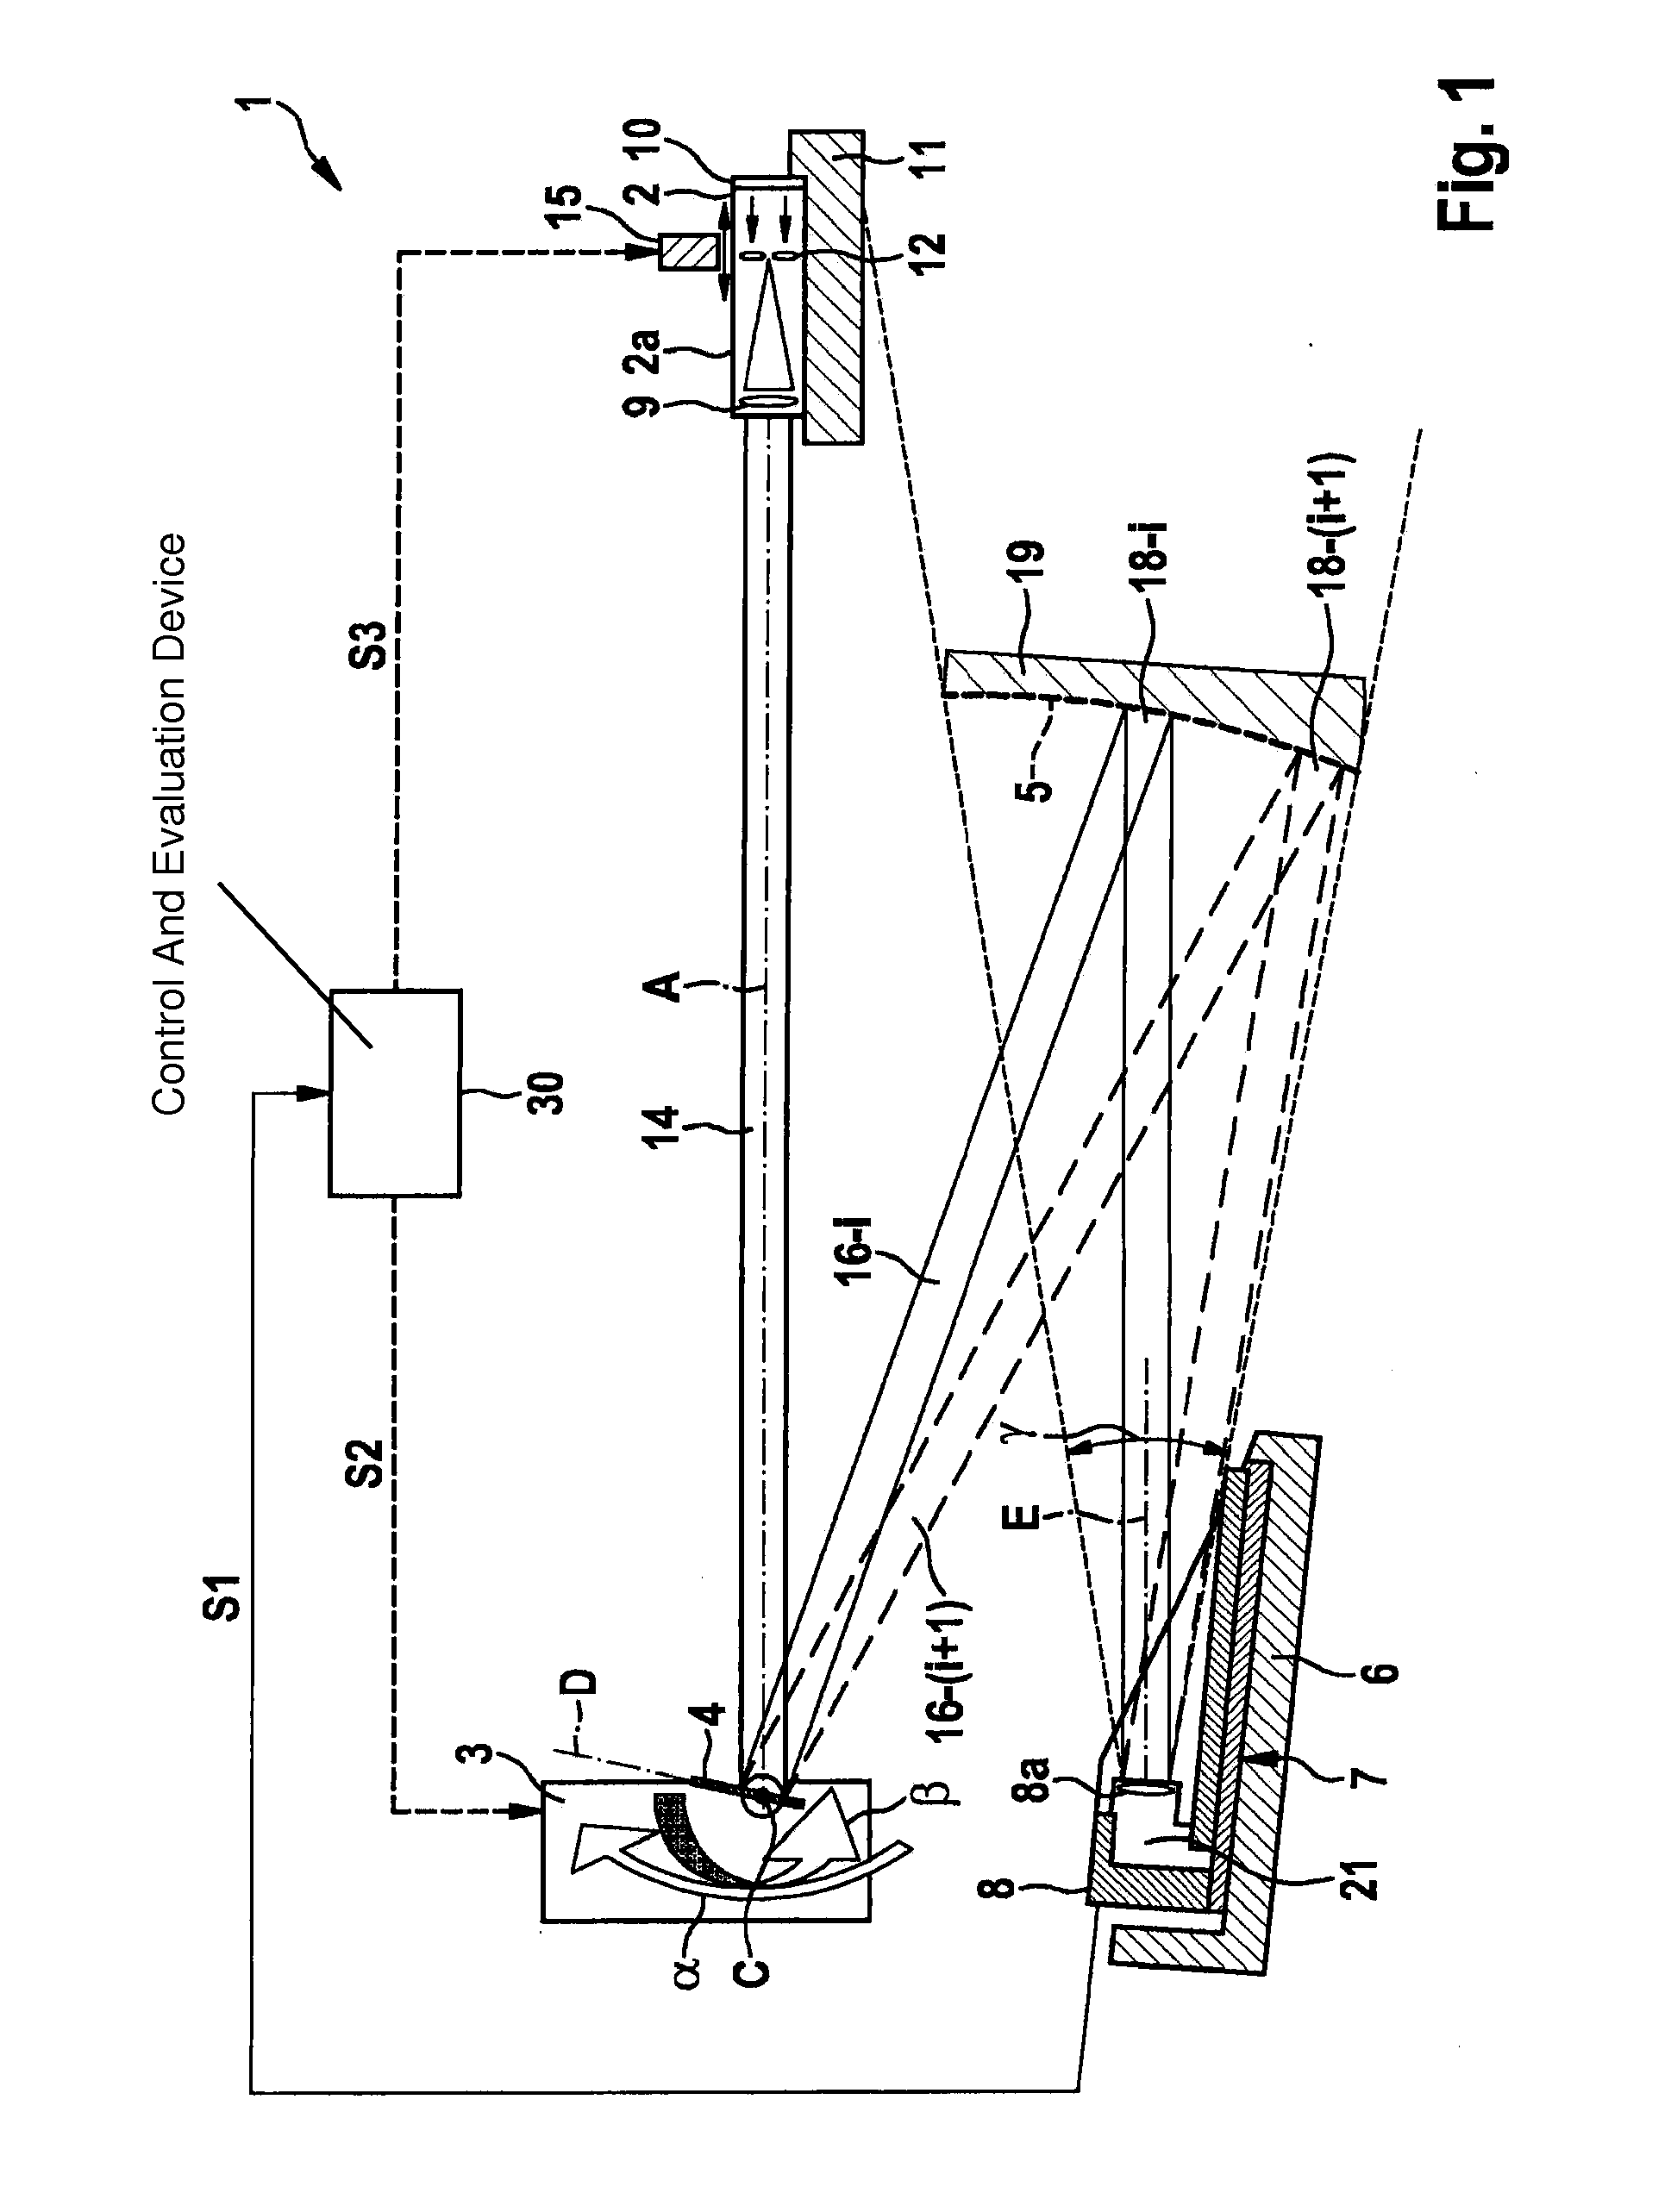 Device and method for measuring a camera